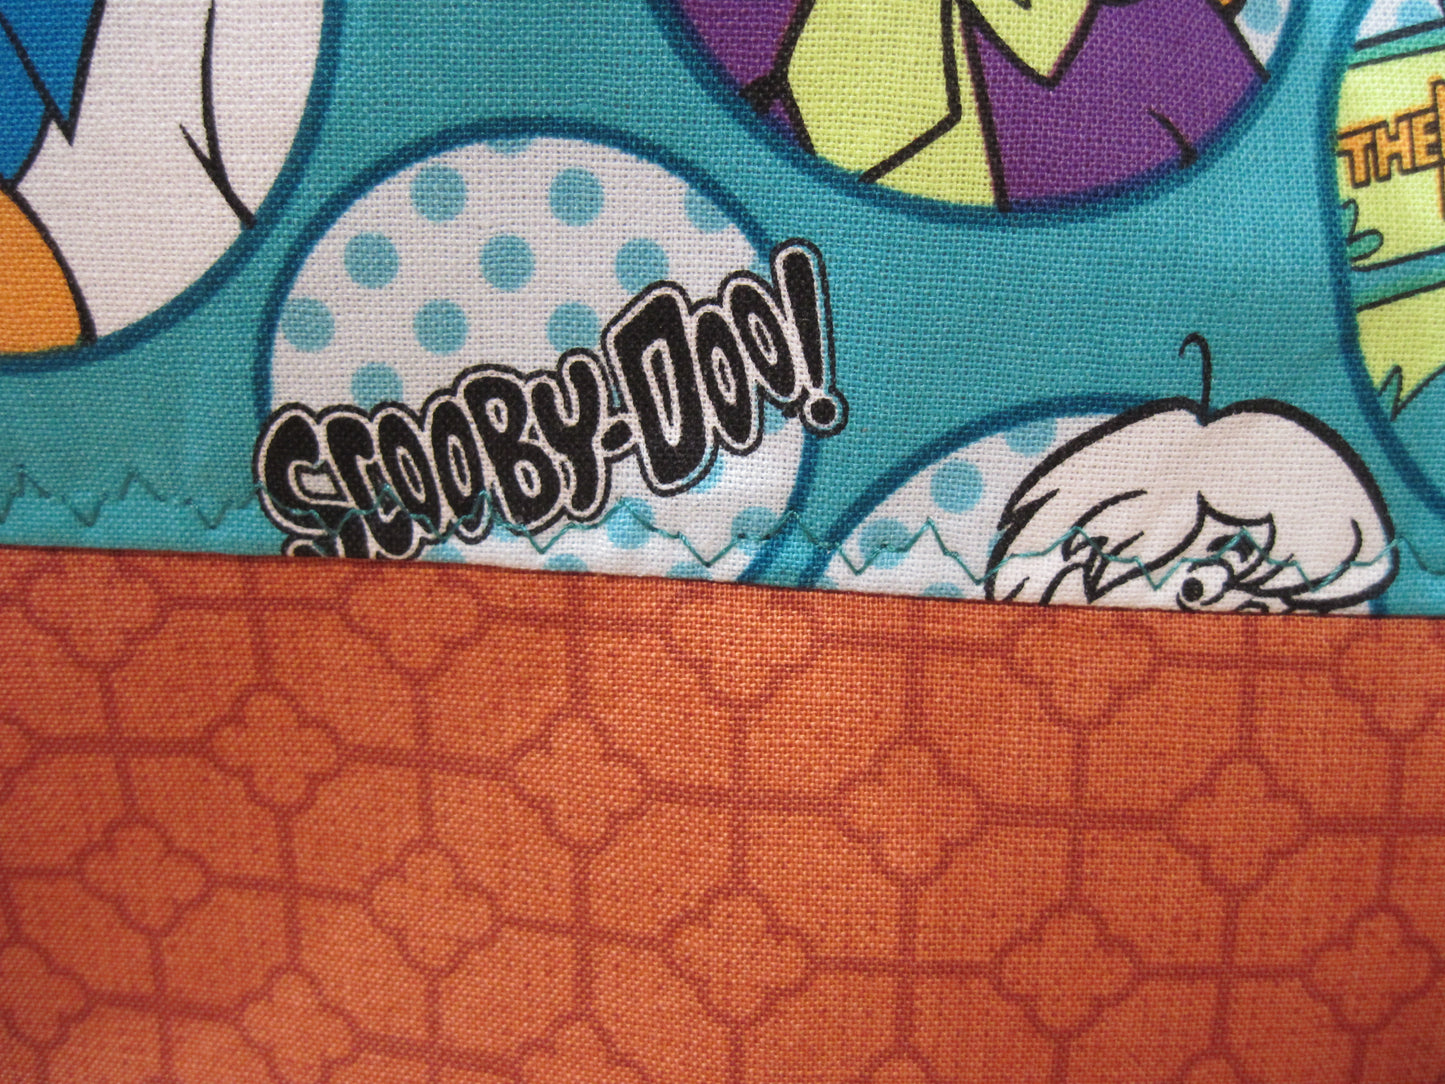 X-Large tote style bag~ Scooby Doo Crew w/ sewn handles